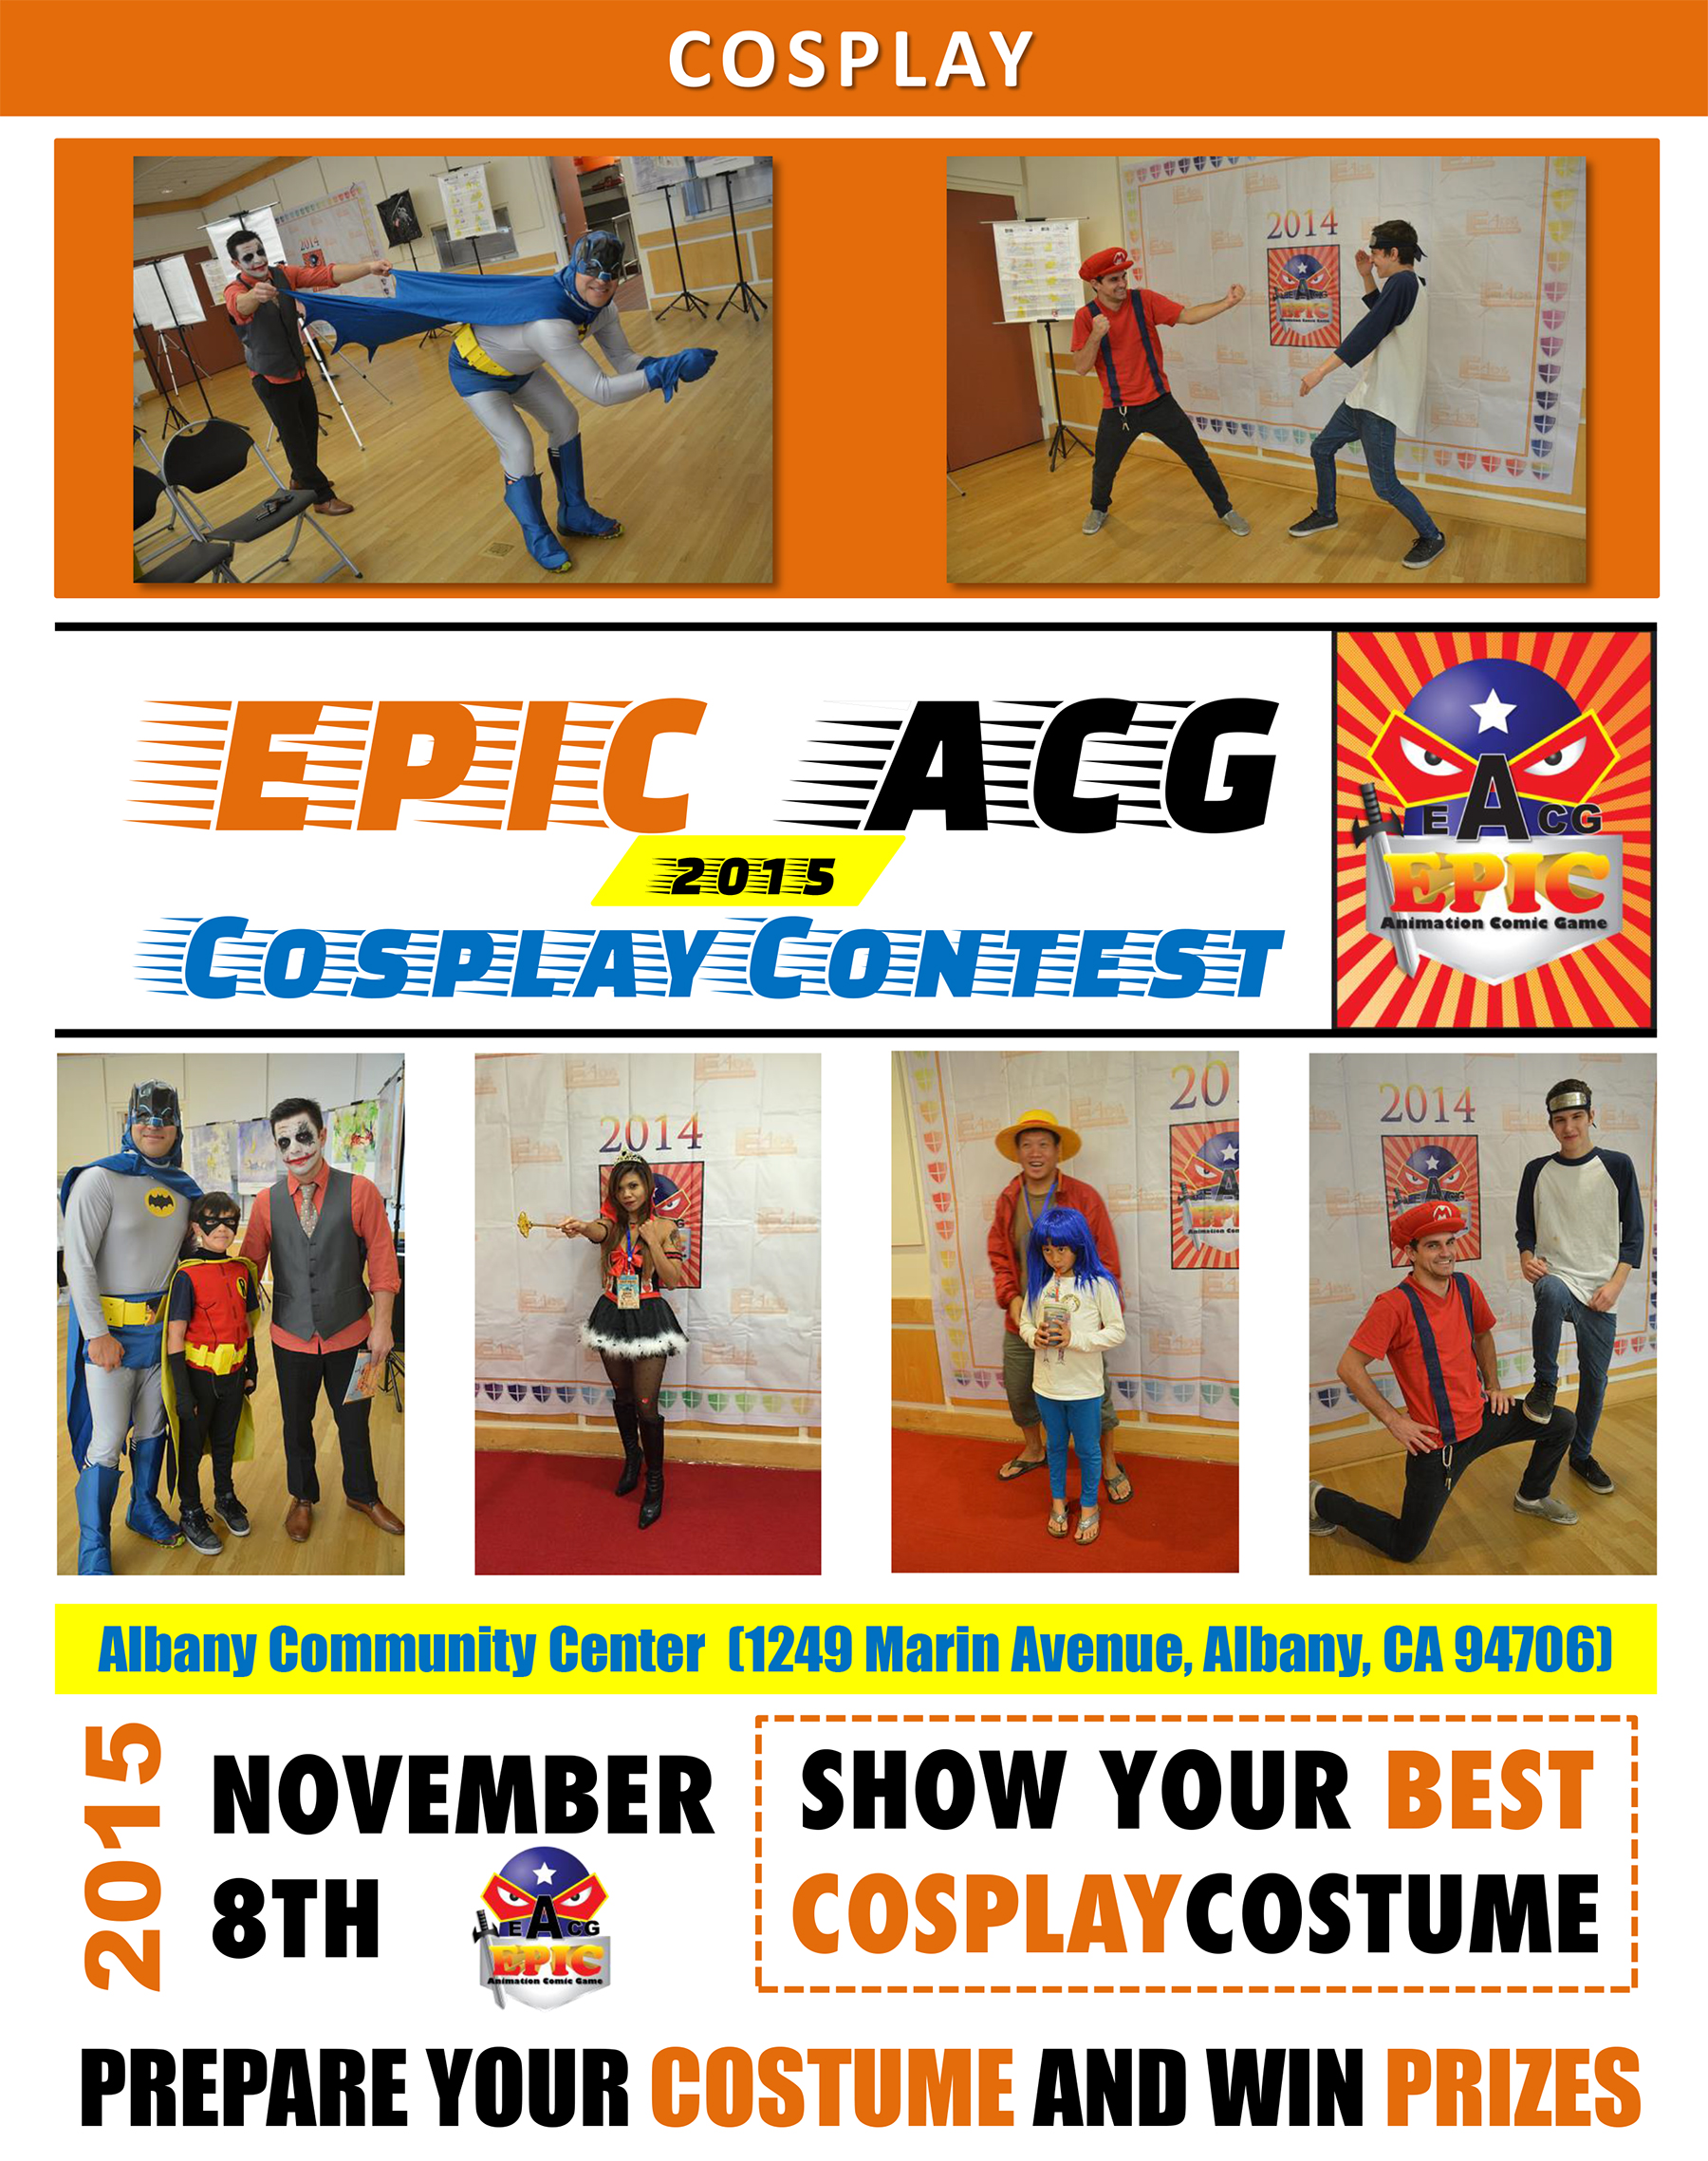 the Epic ACG cosplay